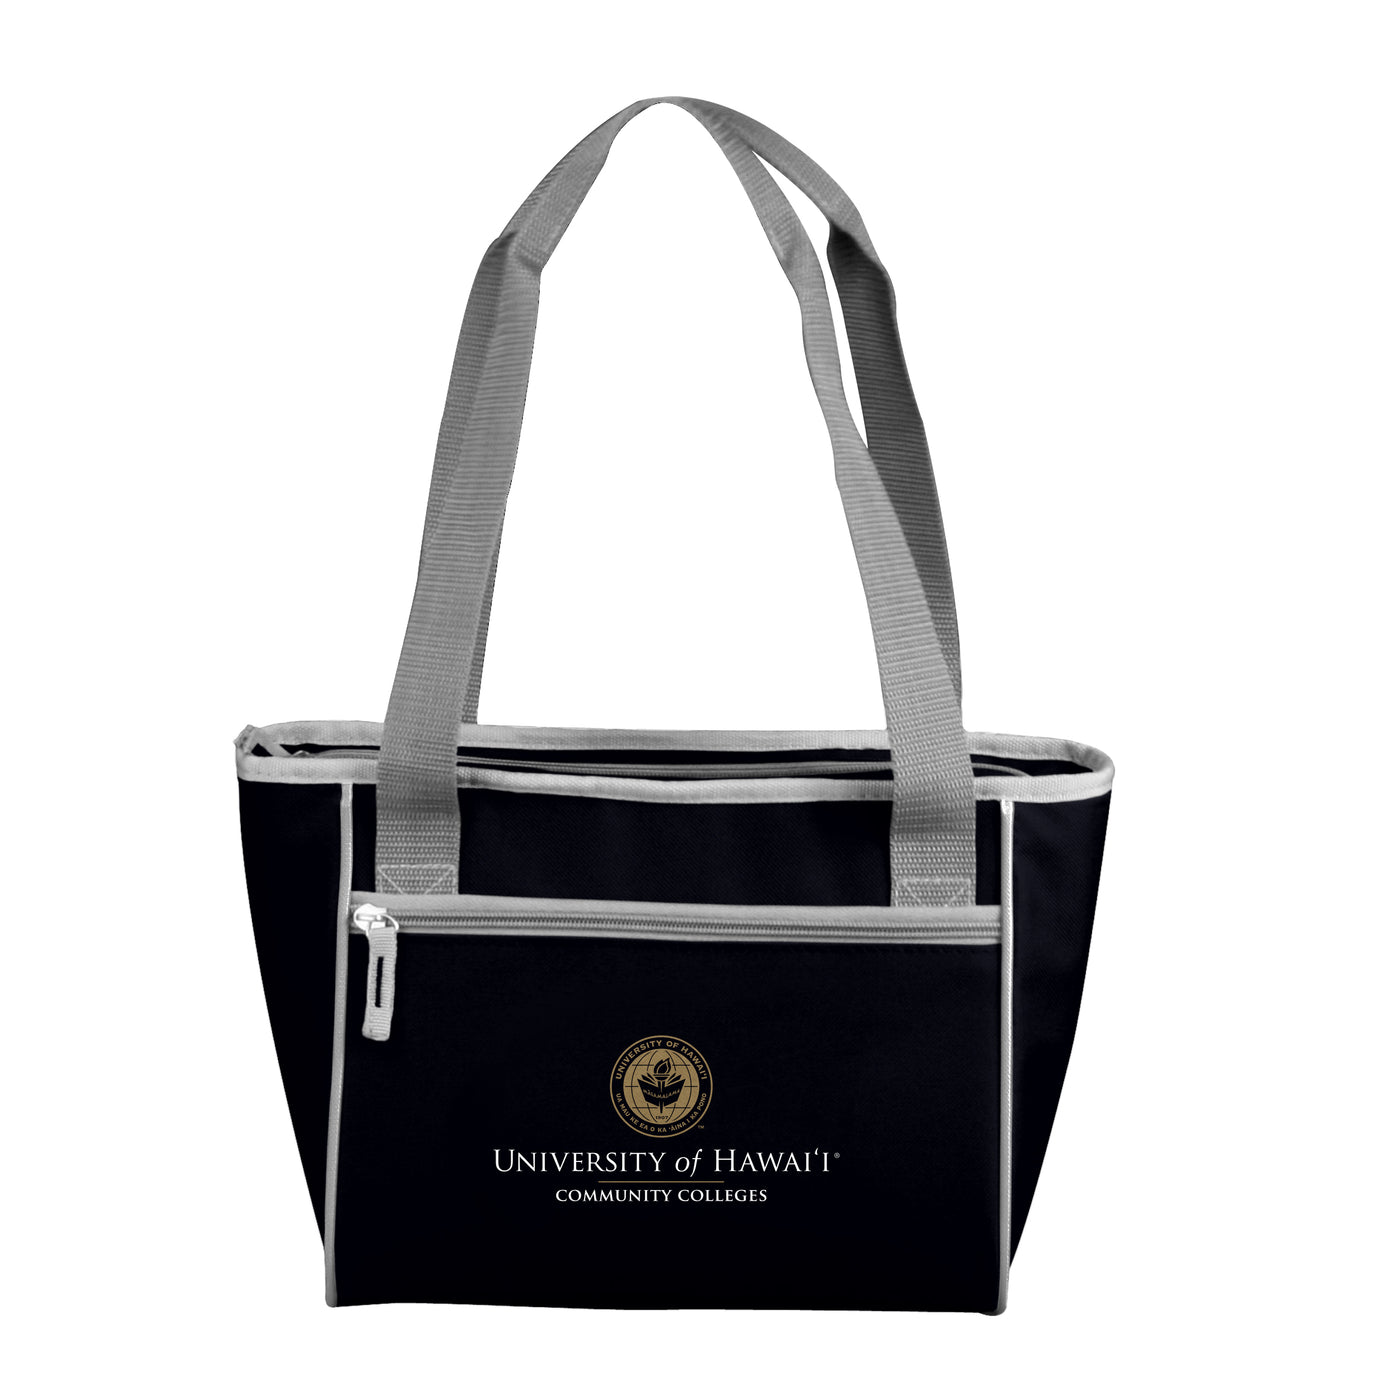 University of Hawaii Community Colleges 16 Can Cooler Tote